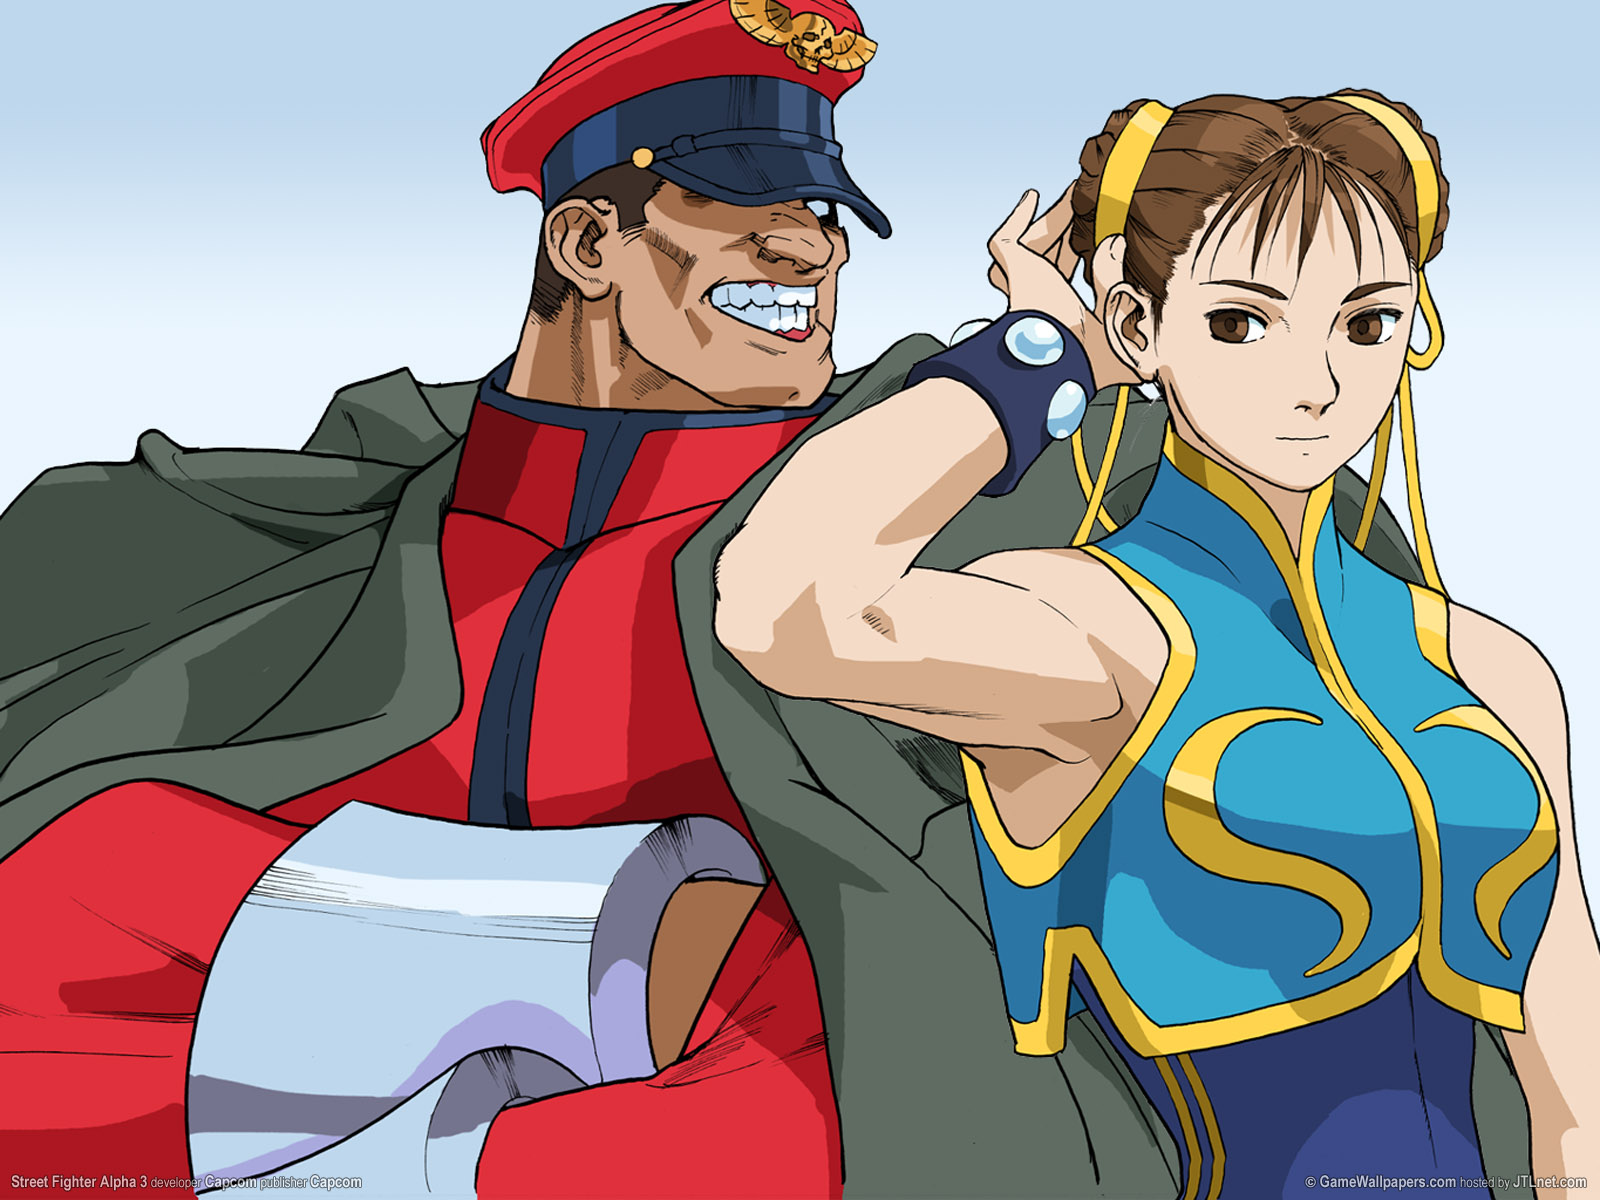 Amazing Street Fighter Alpha 3 Pictures & Backgrounds